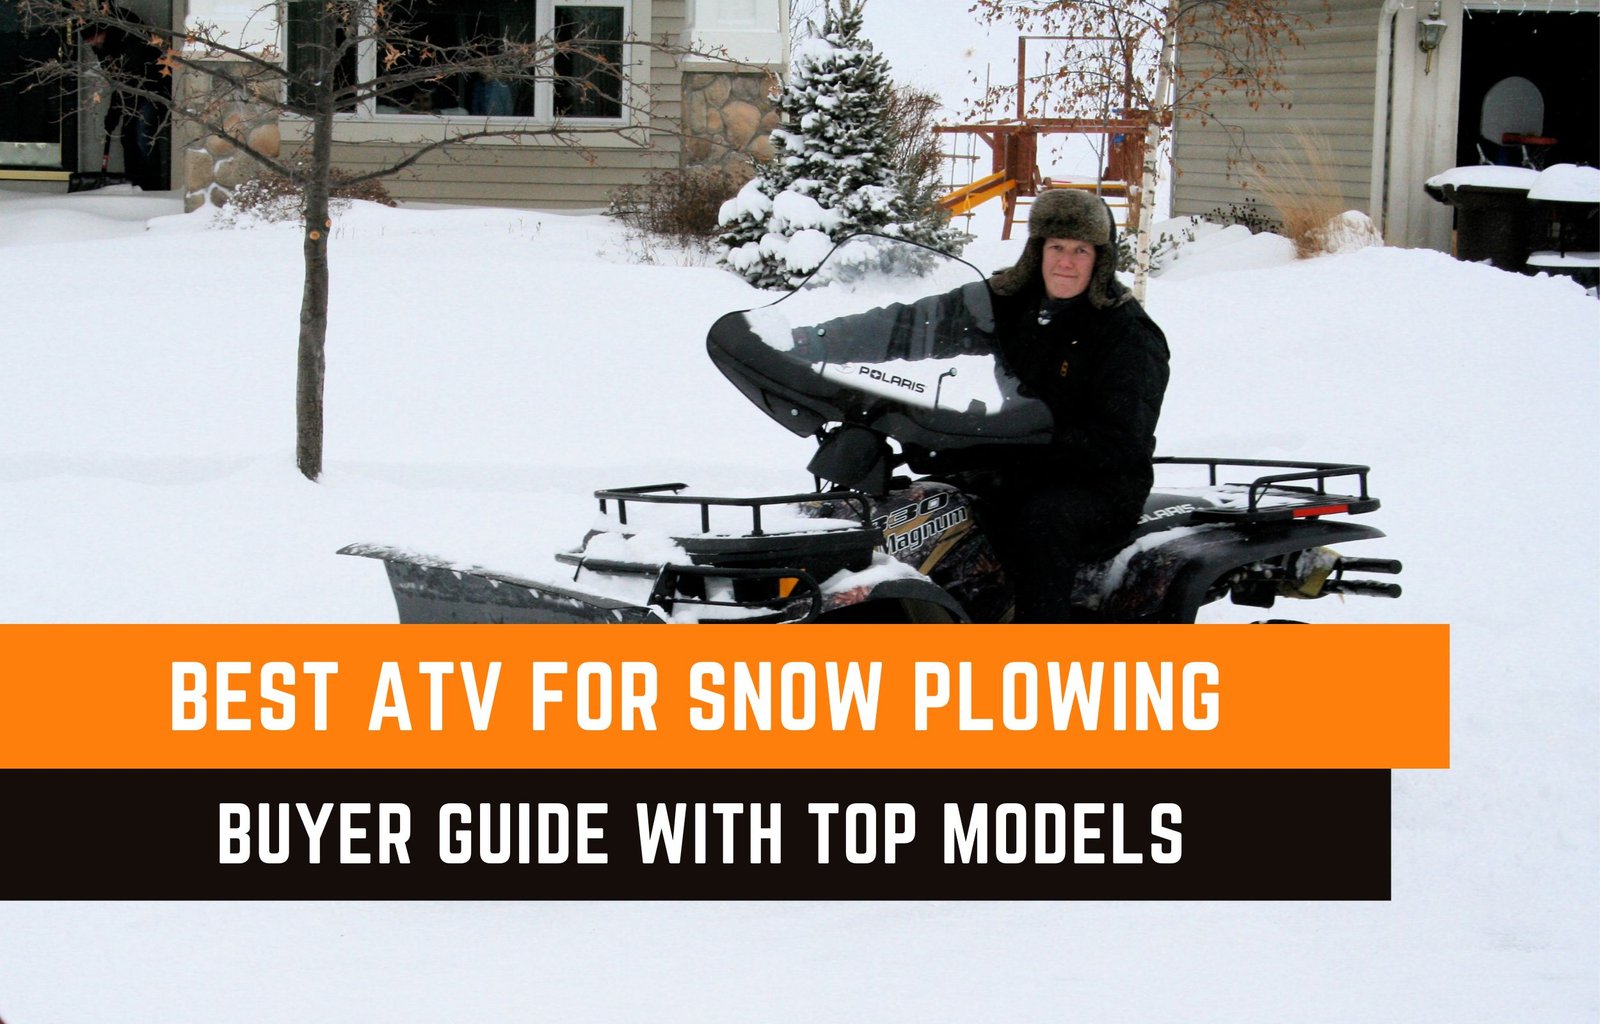 Best ATV For Snow Plowing